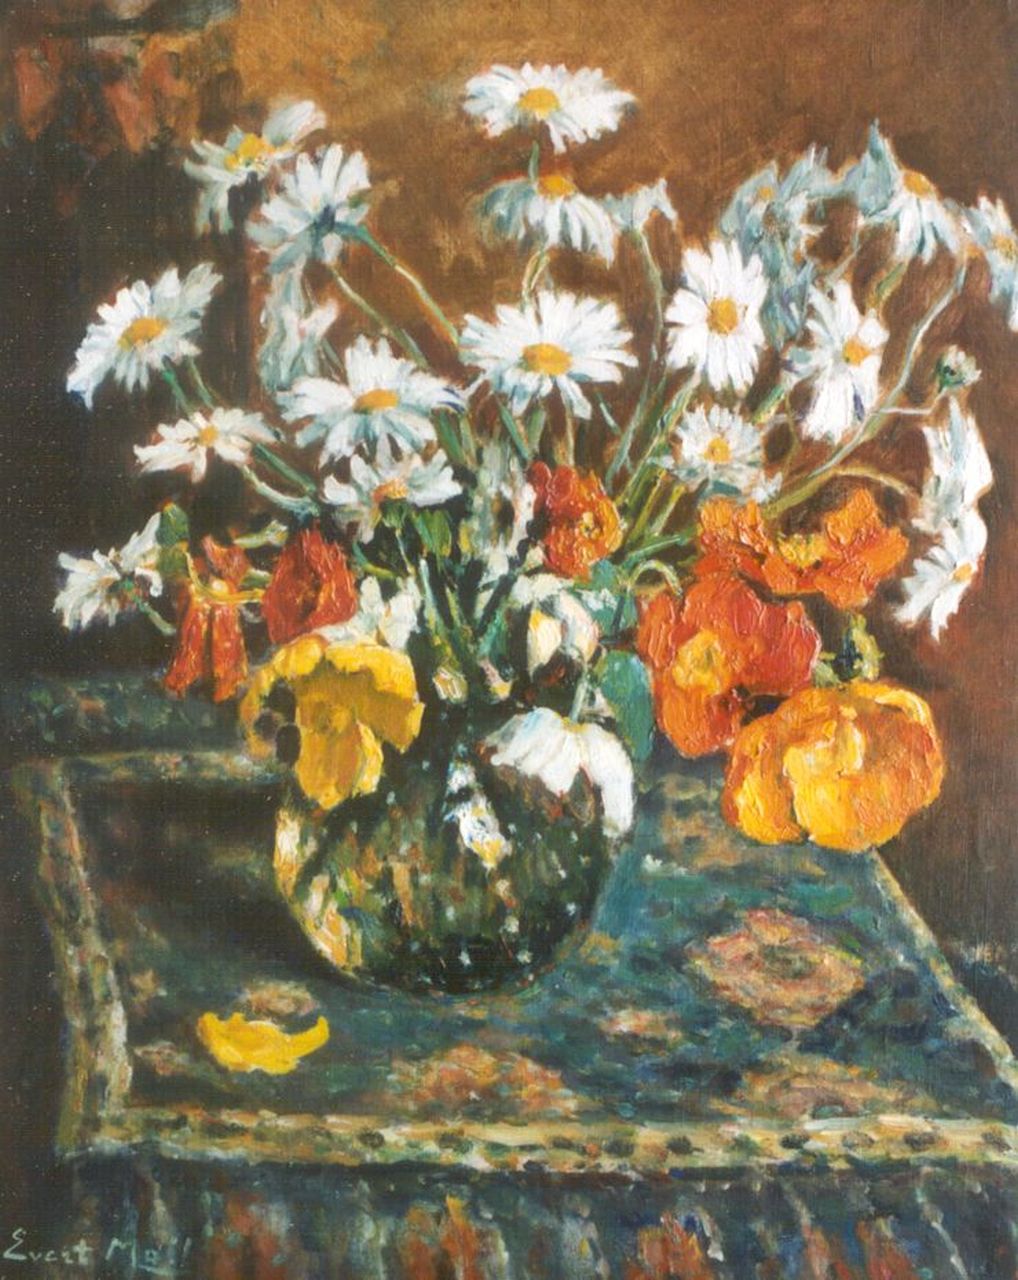 Moll E.  | Evert Moll, Daisies and tulips, oil on canvas 70.0 x 59.8 cm, signed l.l.